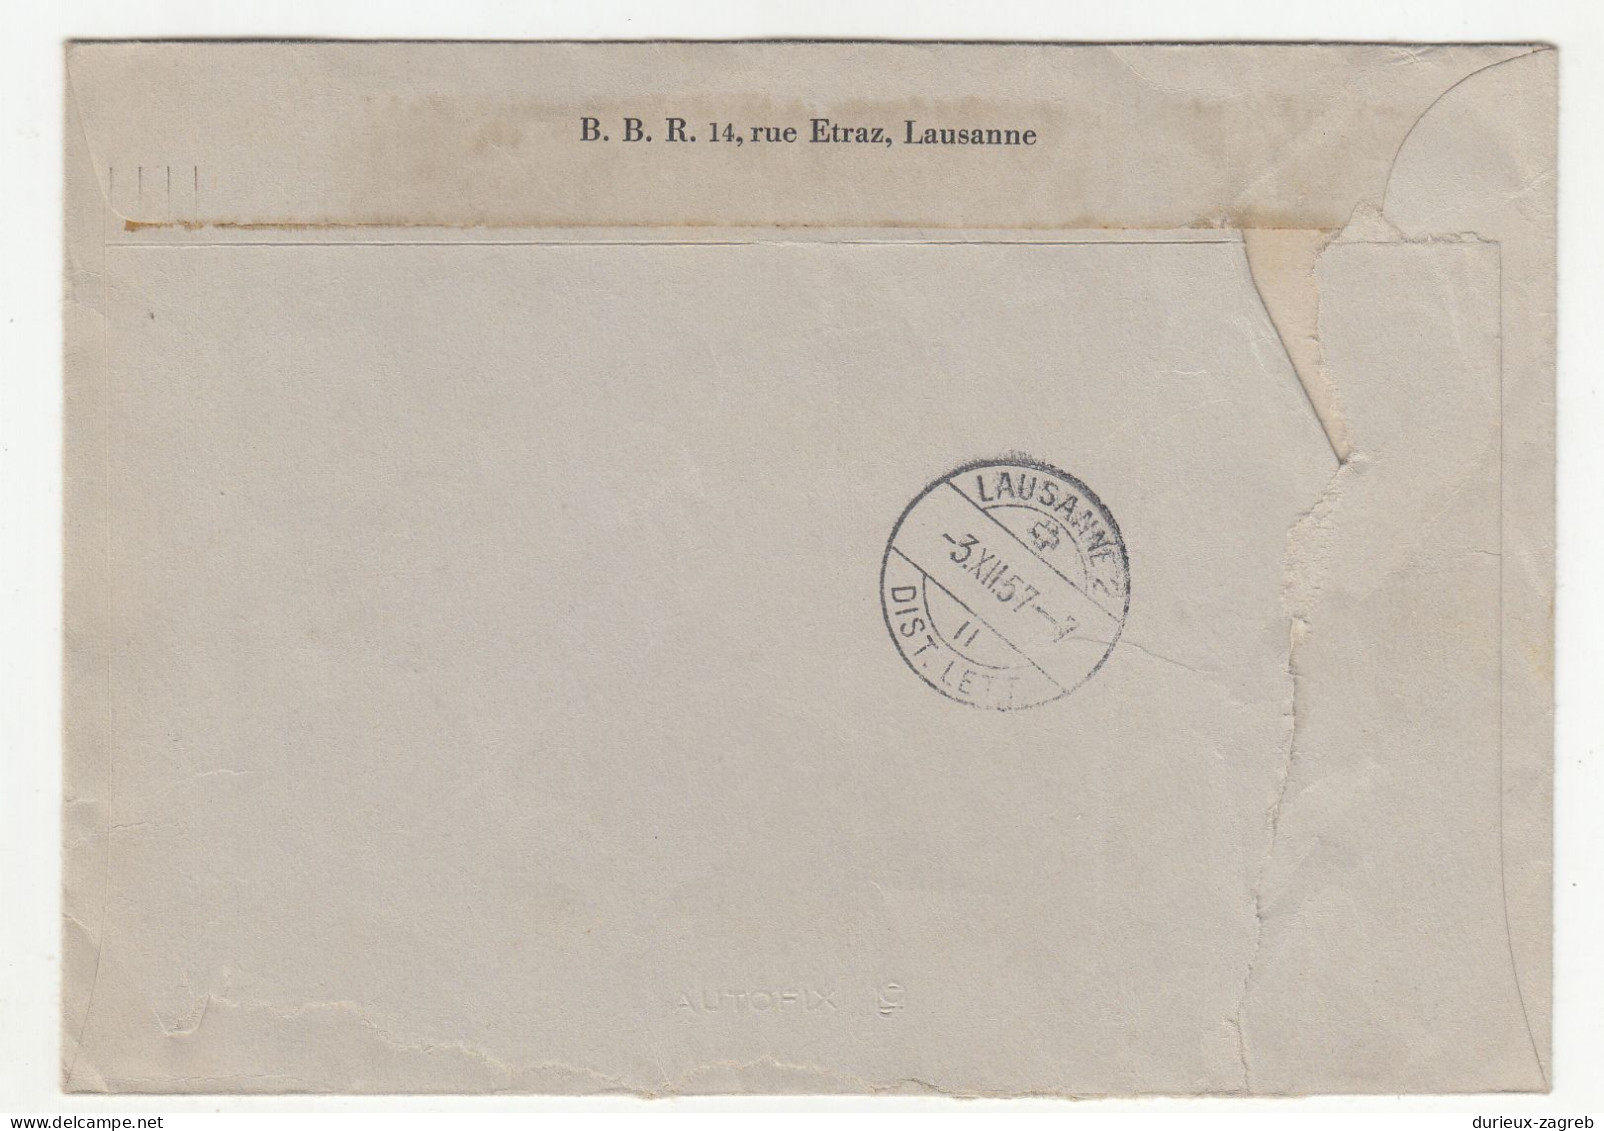 Switzerland Letter Meter Stamp Cover Posted 1957 - Taxed Postage Due Switzerland Ordinary Stamp B240510 - Taxe